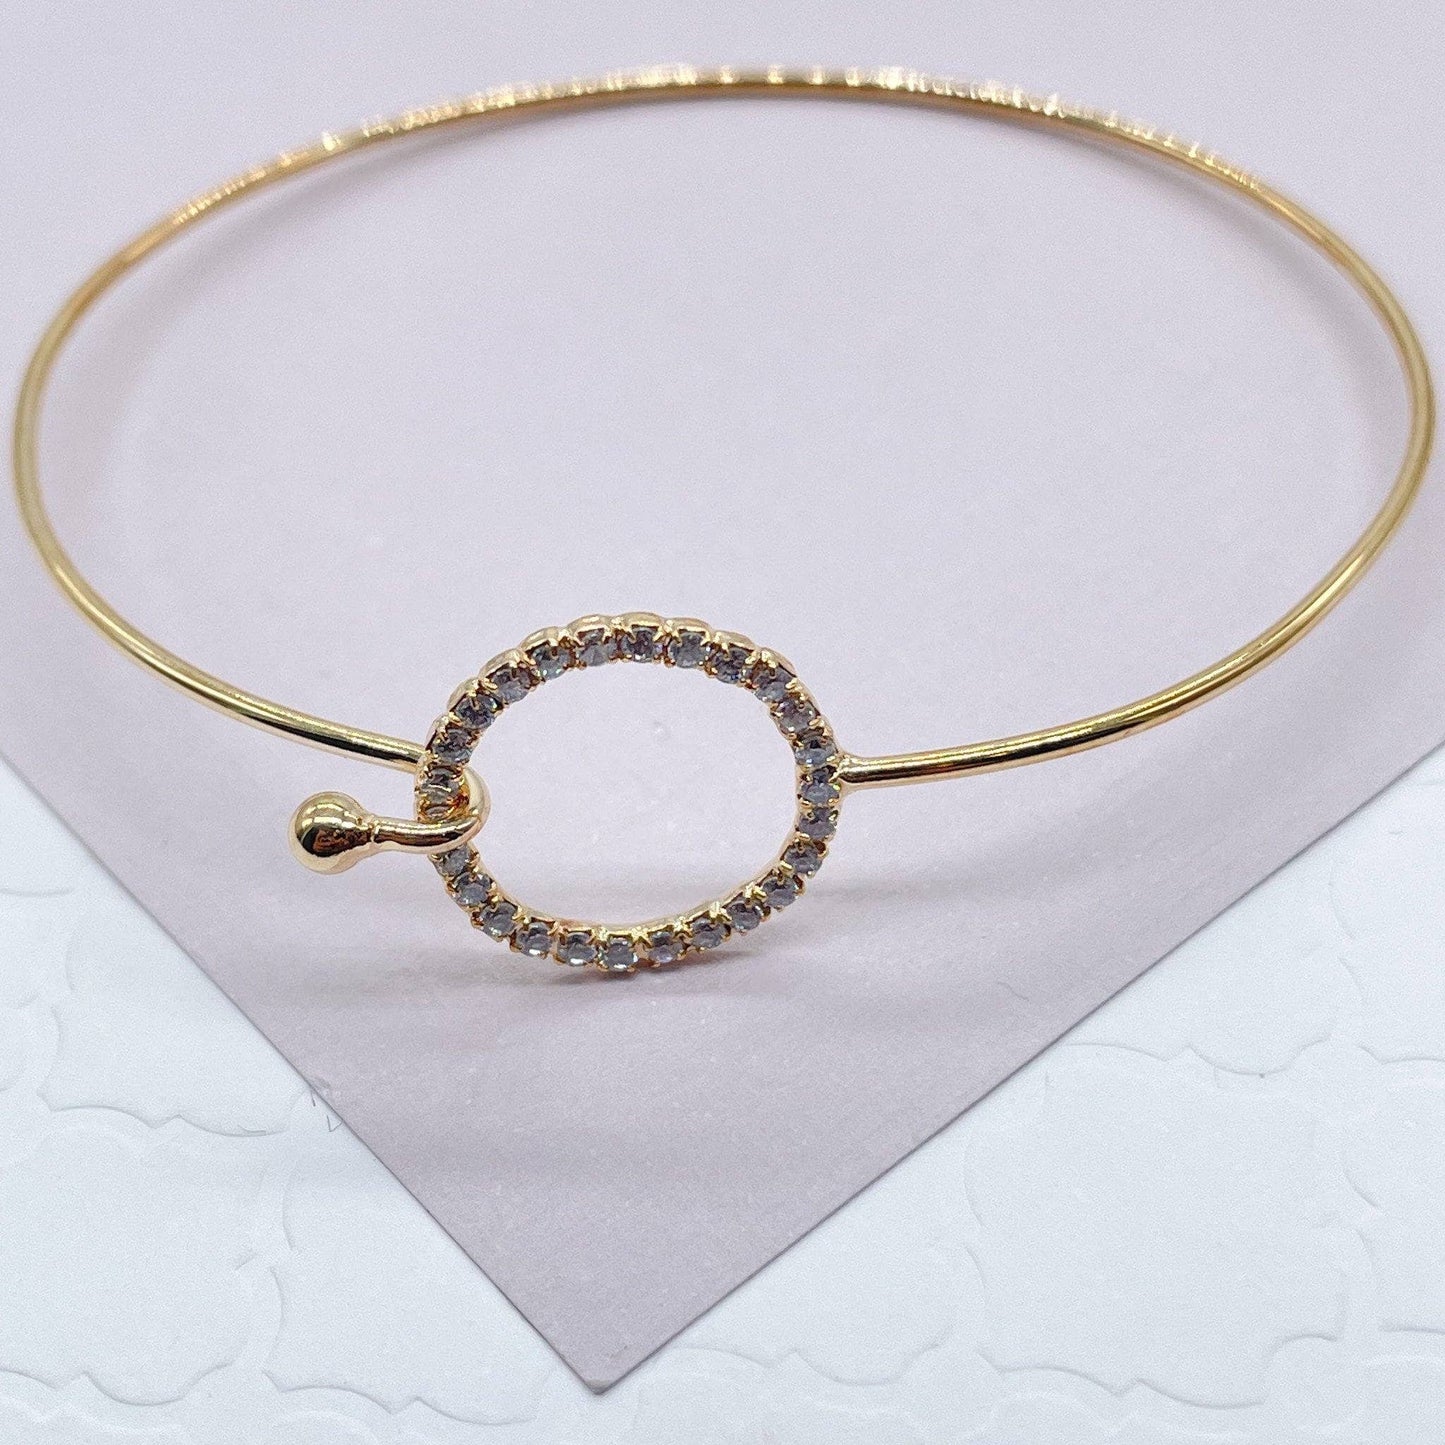 18k Gold Filled Dainty Cubic Zirconia Circle Or Star Bangle